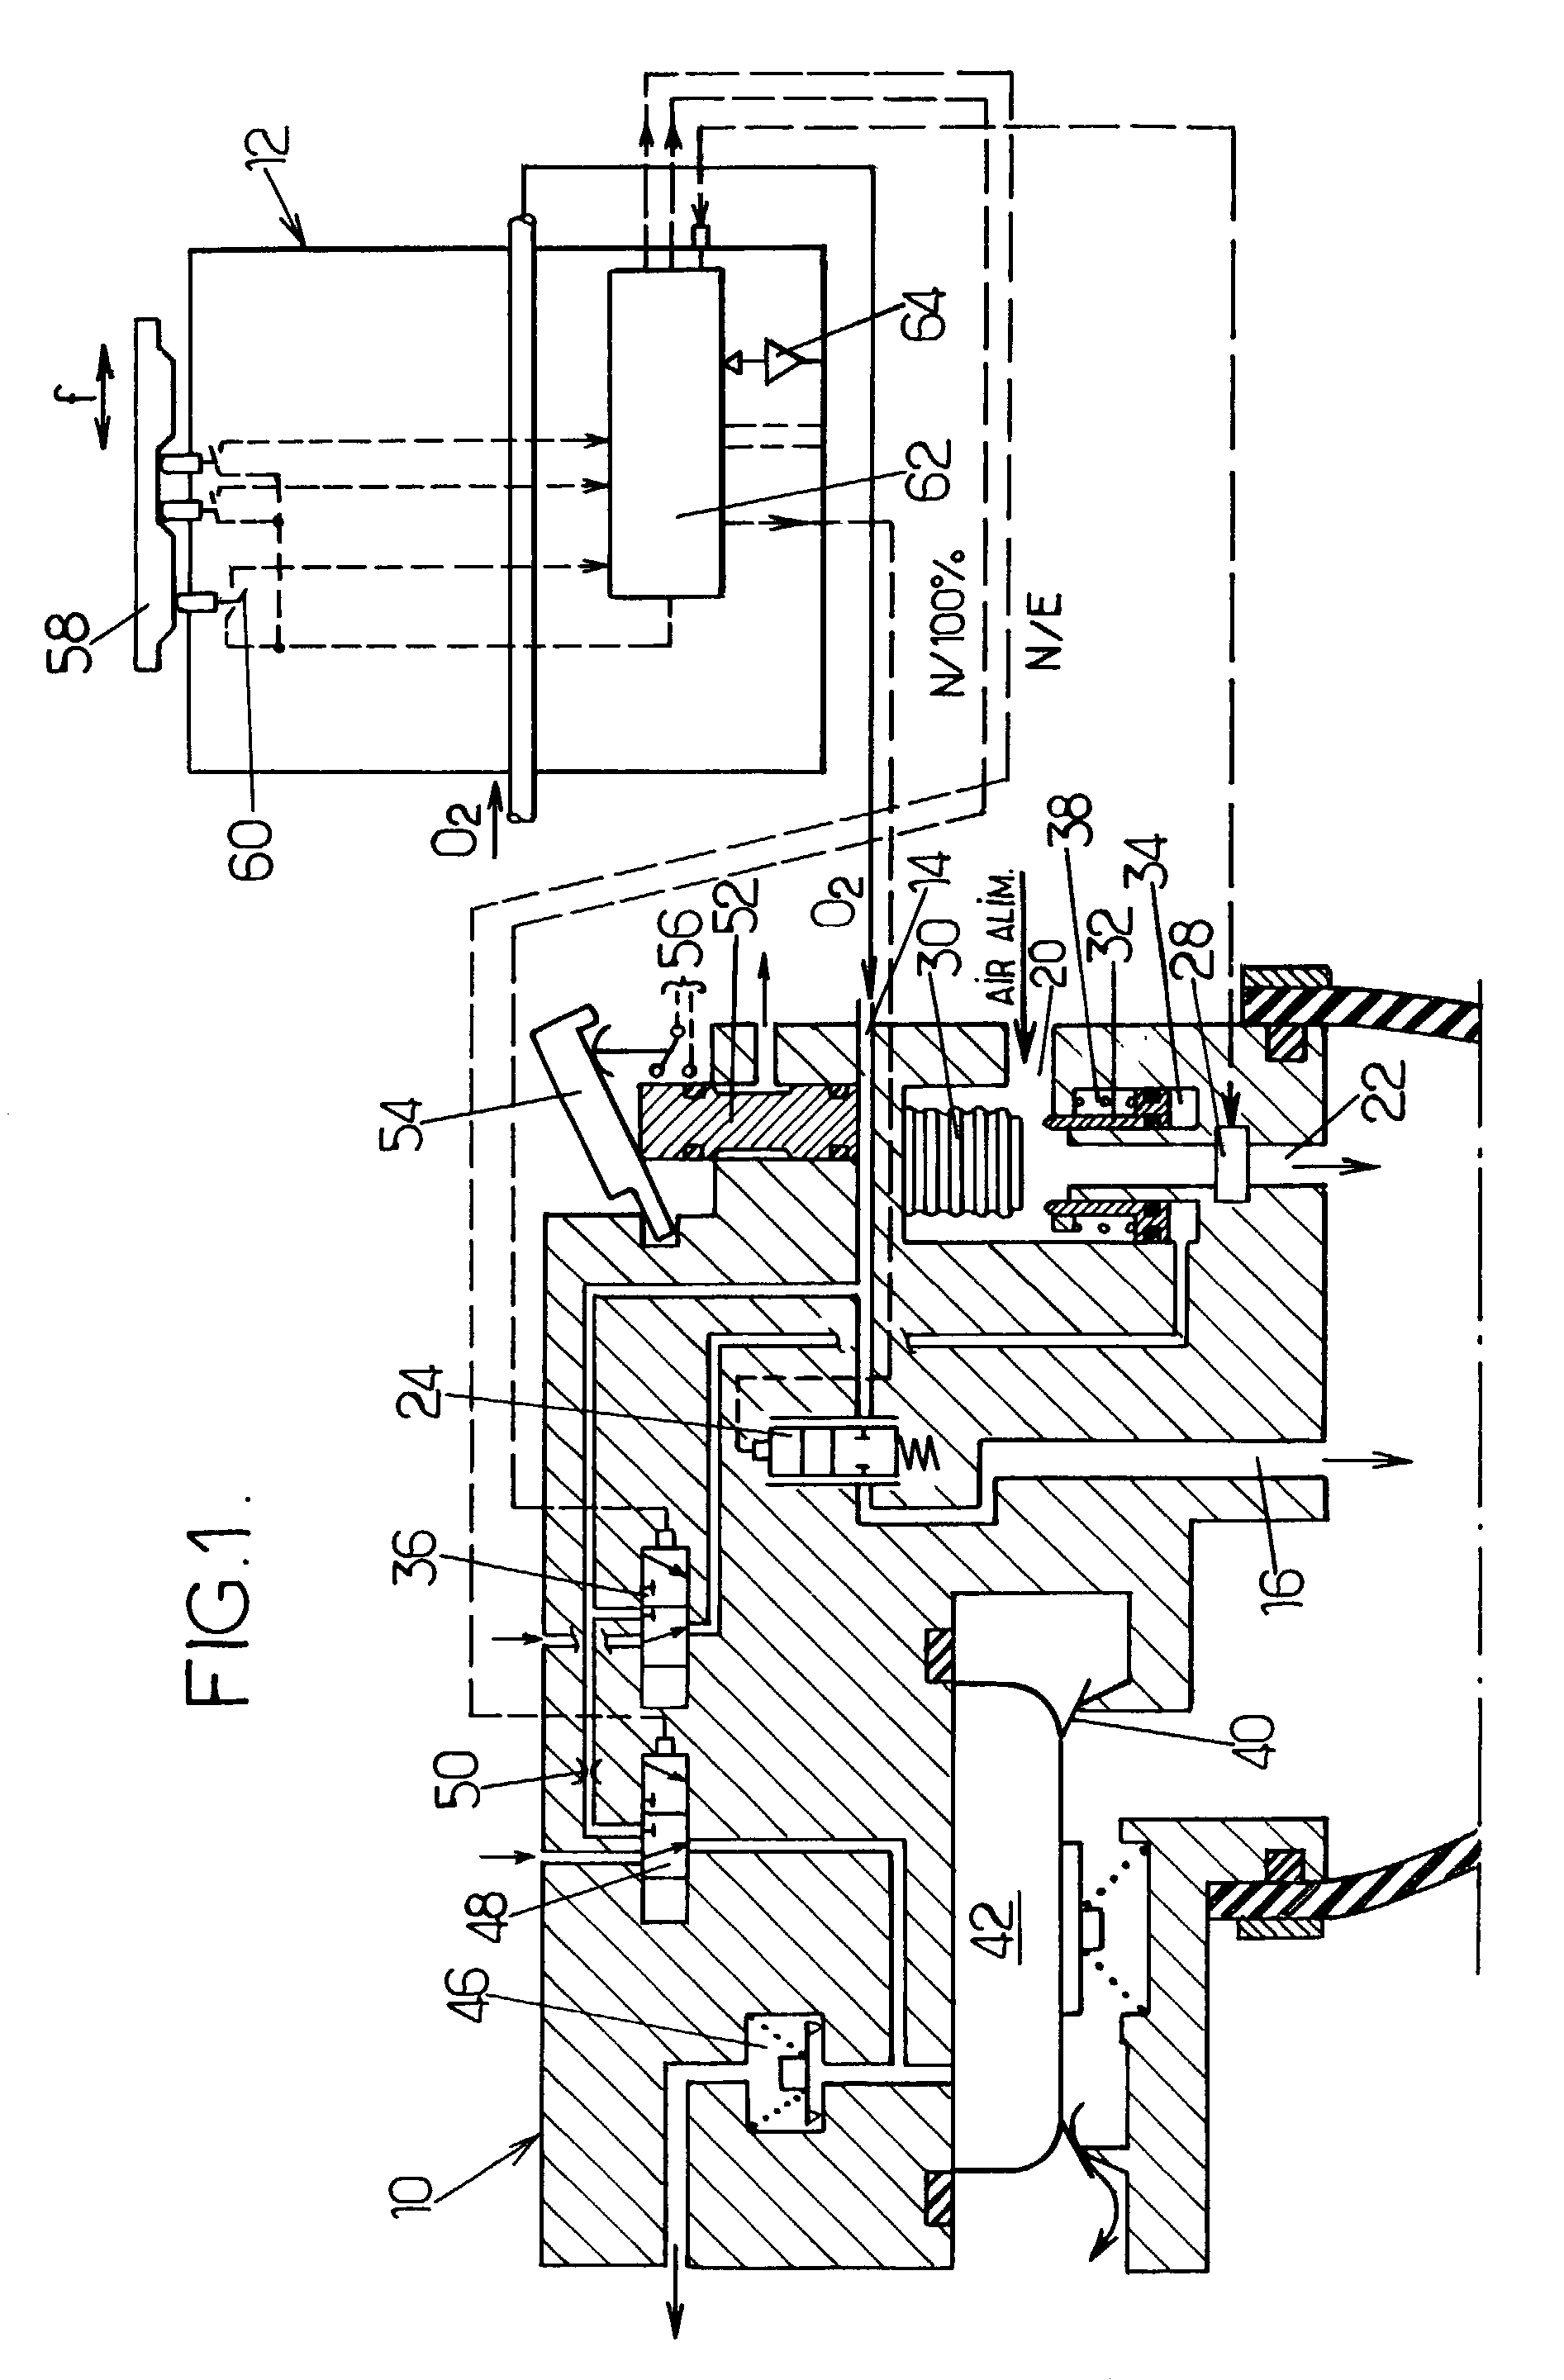 Dilution regulation method and device for breathing apparatus